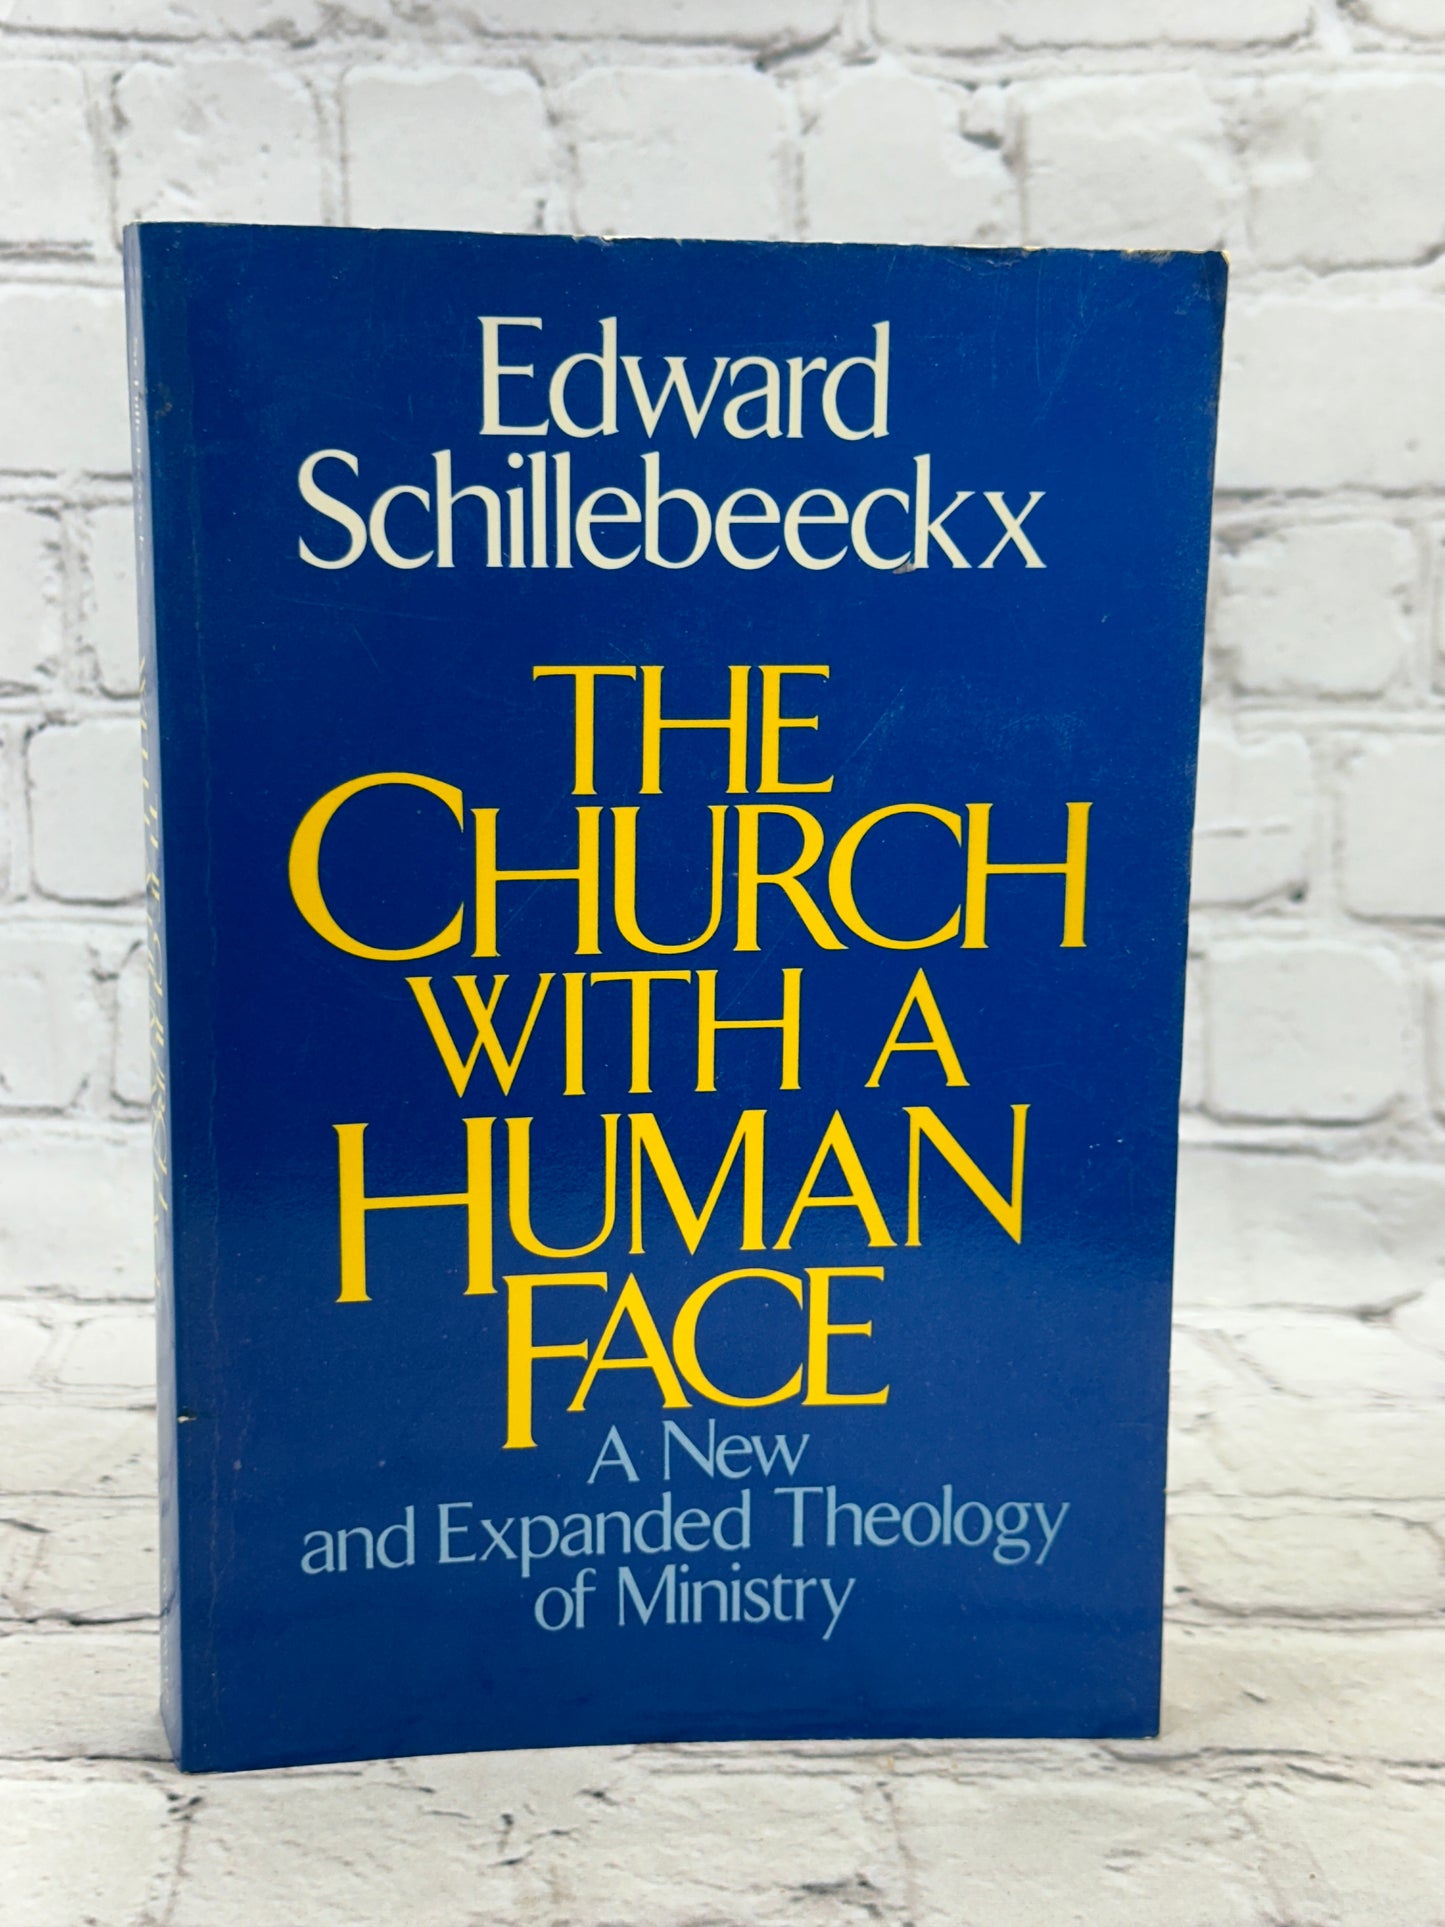 The Church With a Human Face: A New and Expanded..by Edward Schilebeeckx [1990]